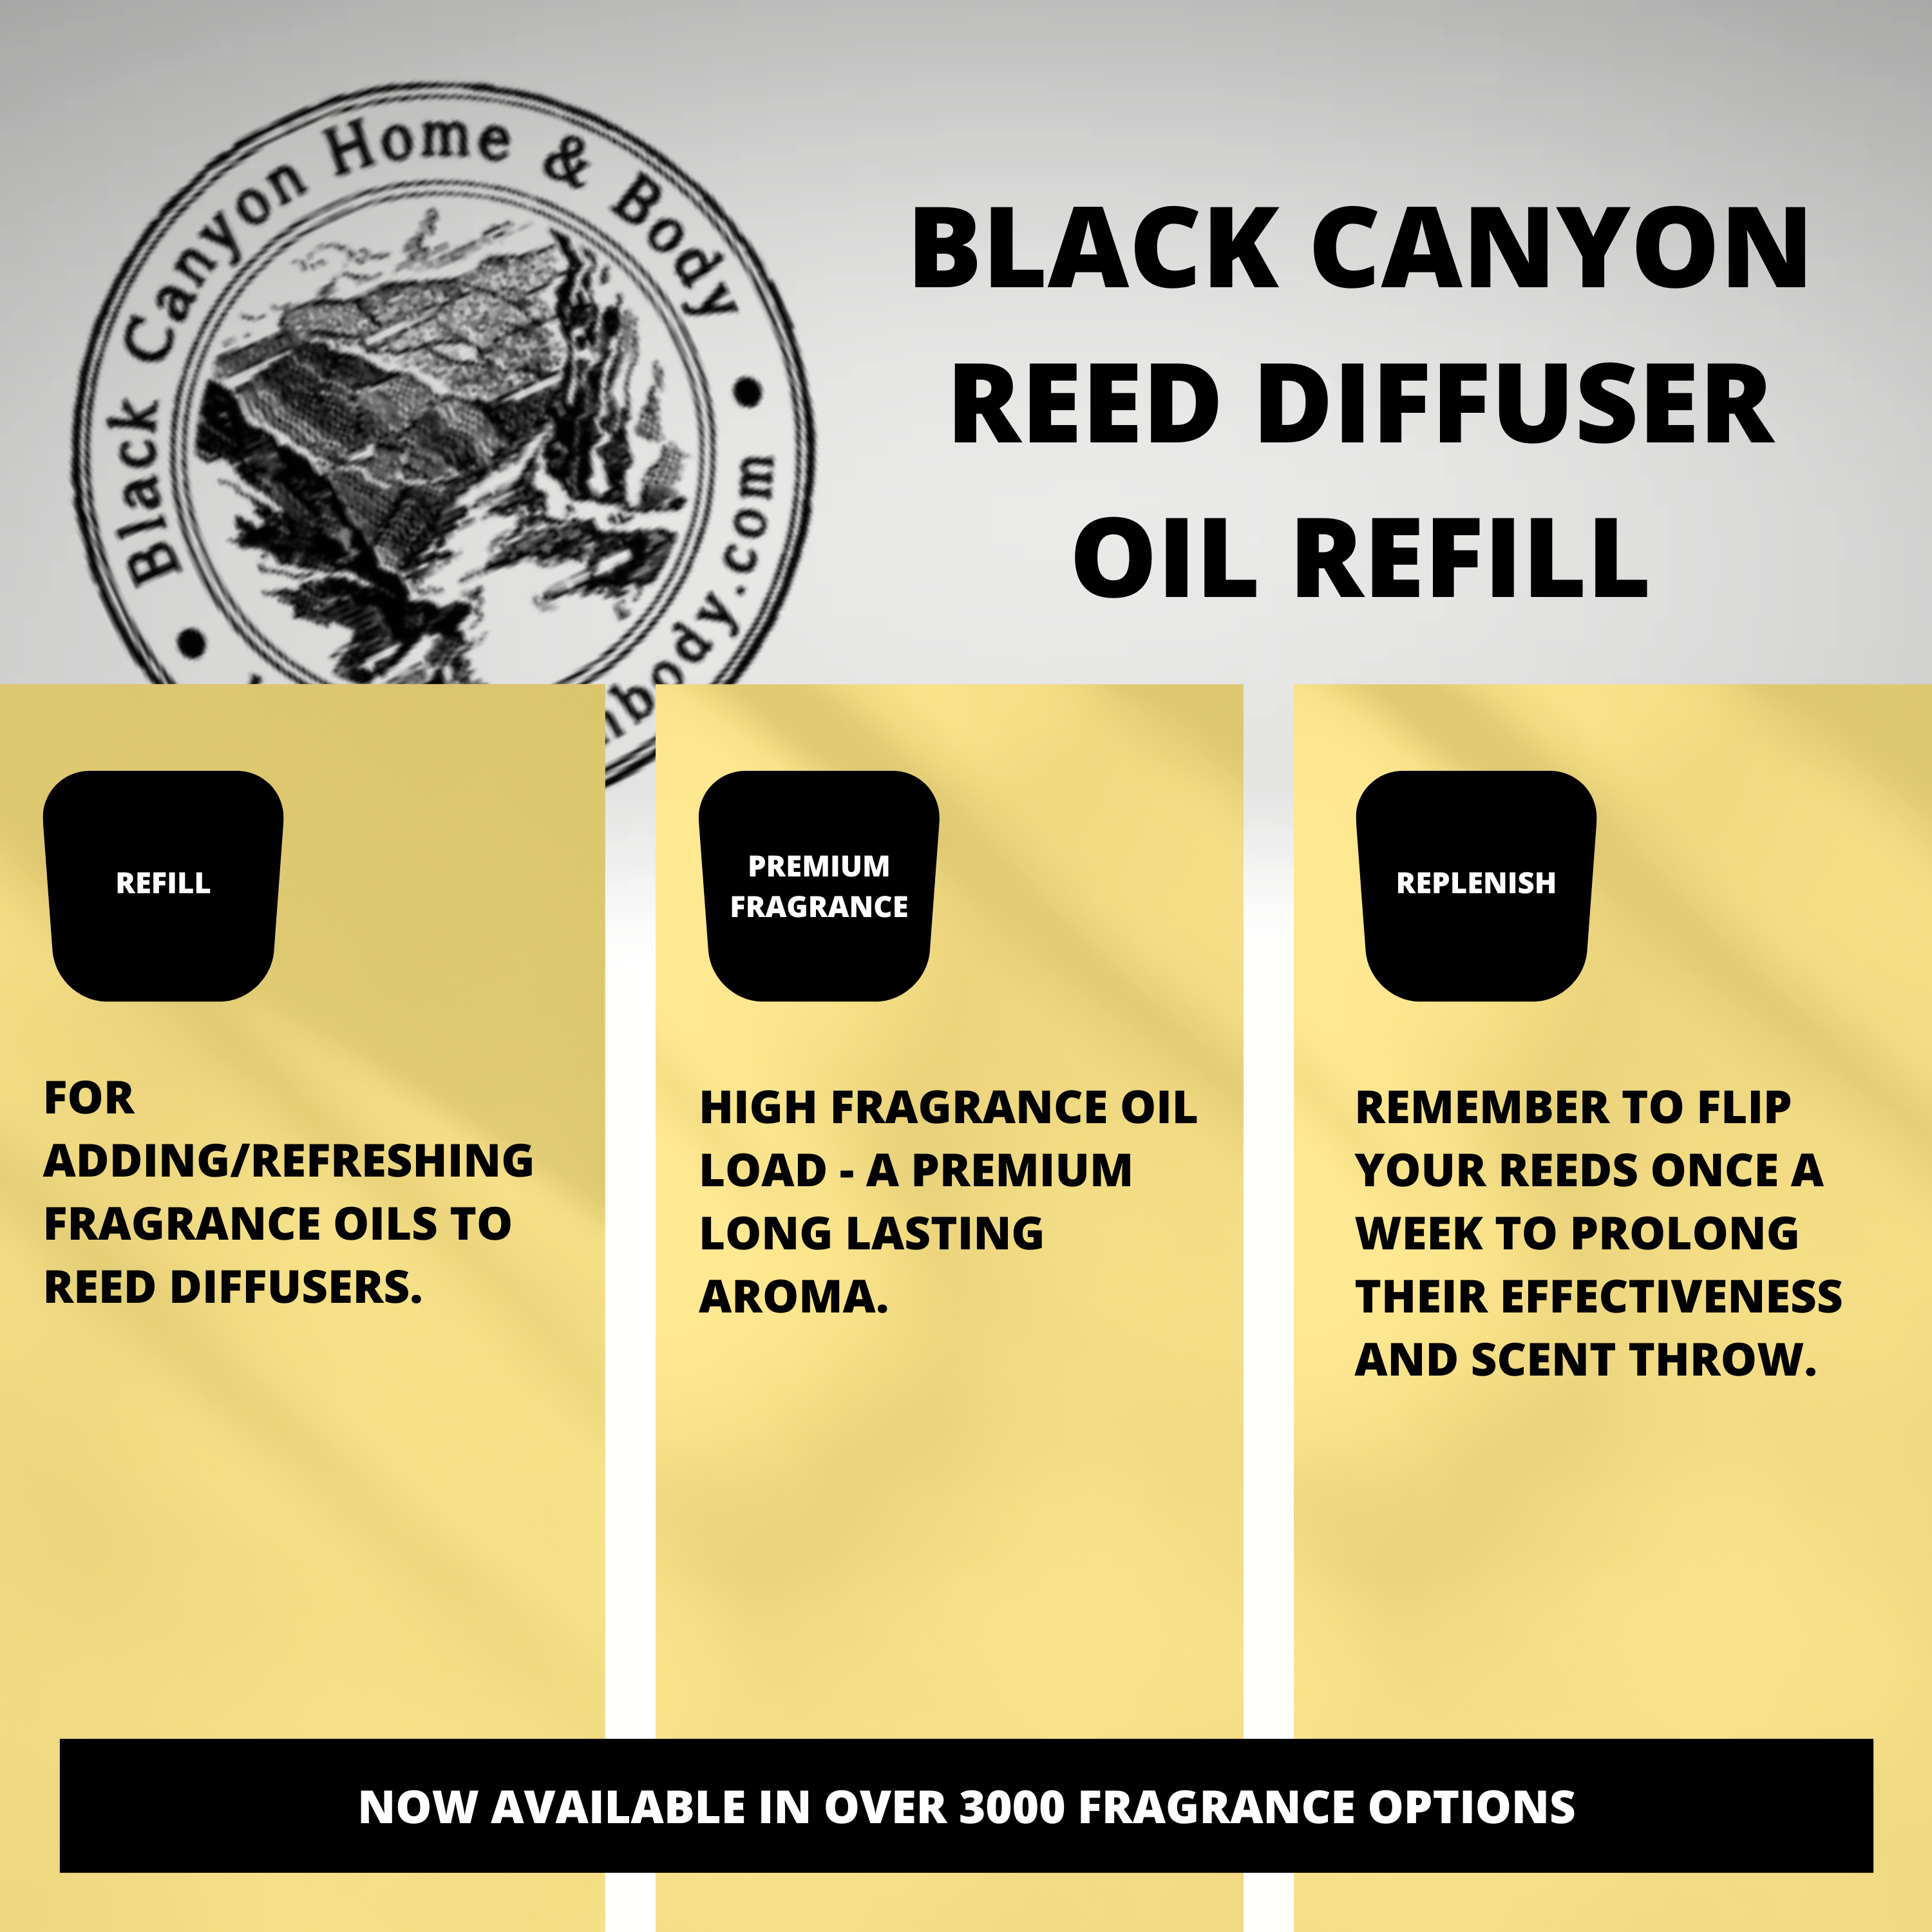 Black Canyon Bitten Scented Reed Diffuser Oil Refill